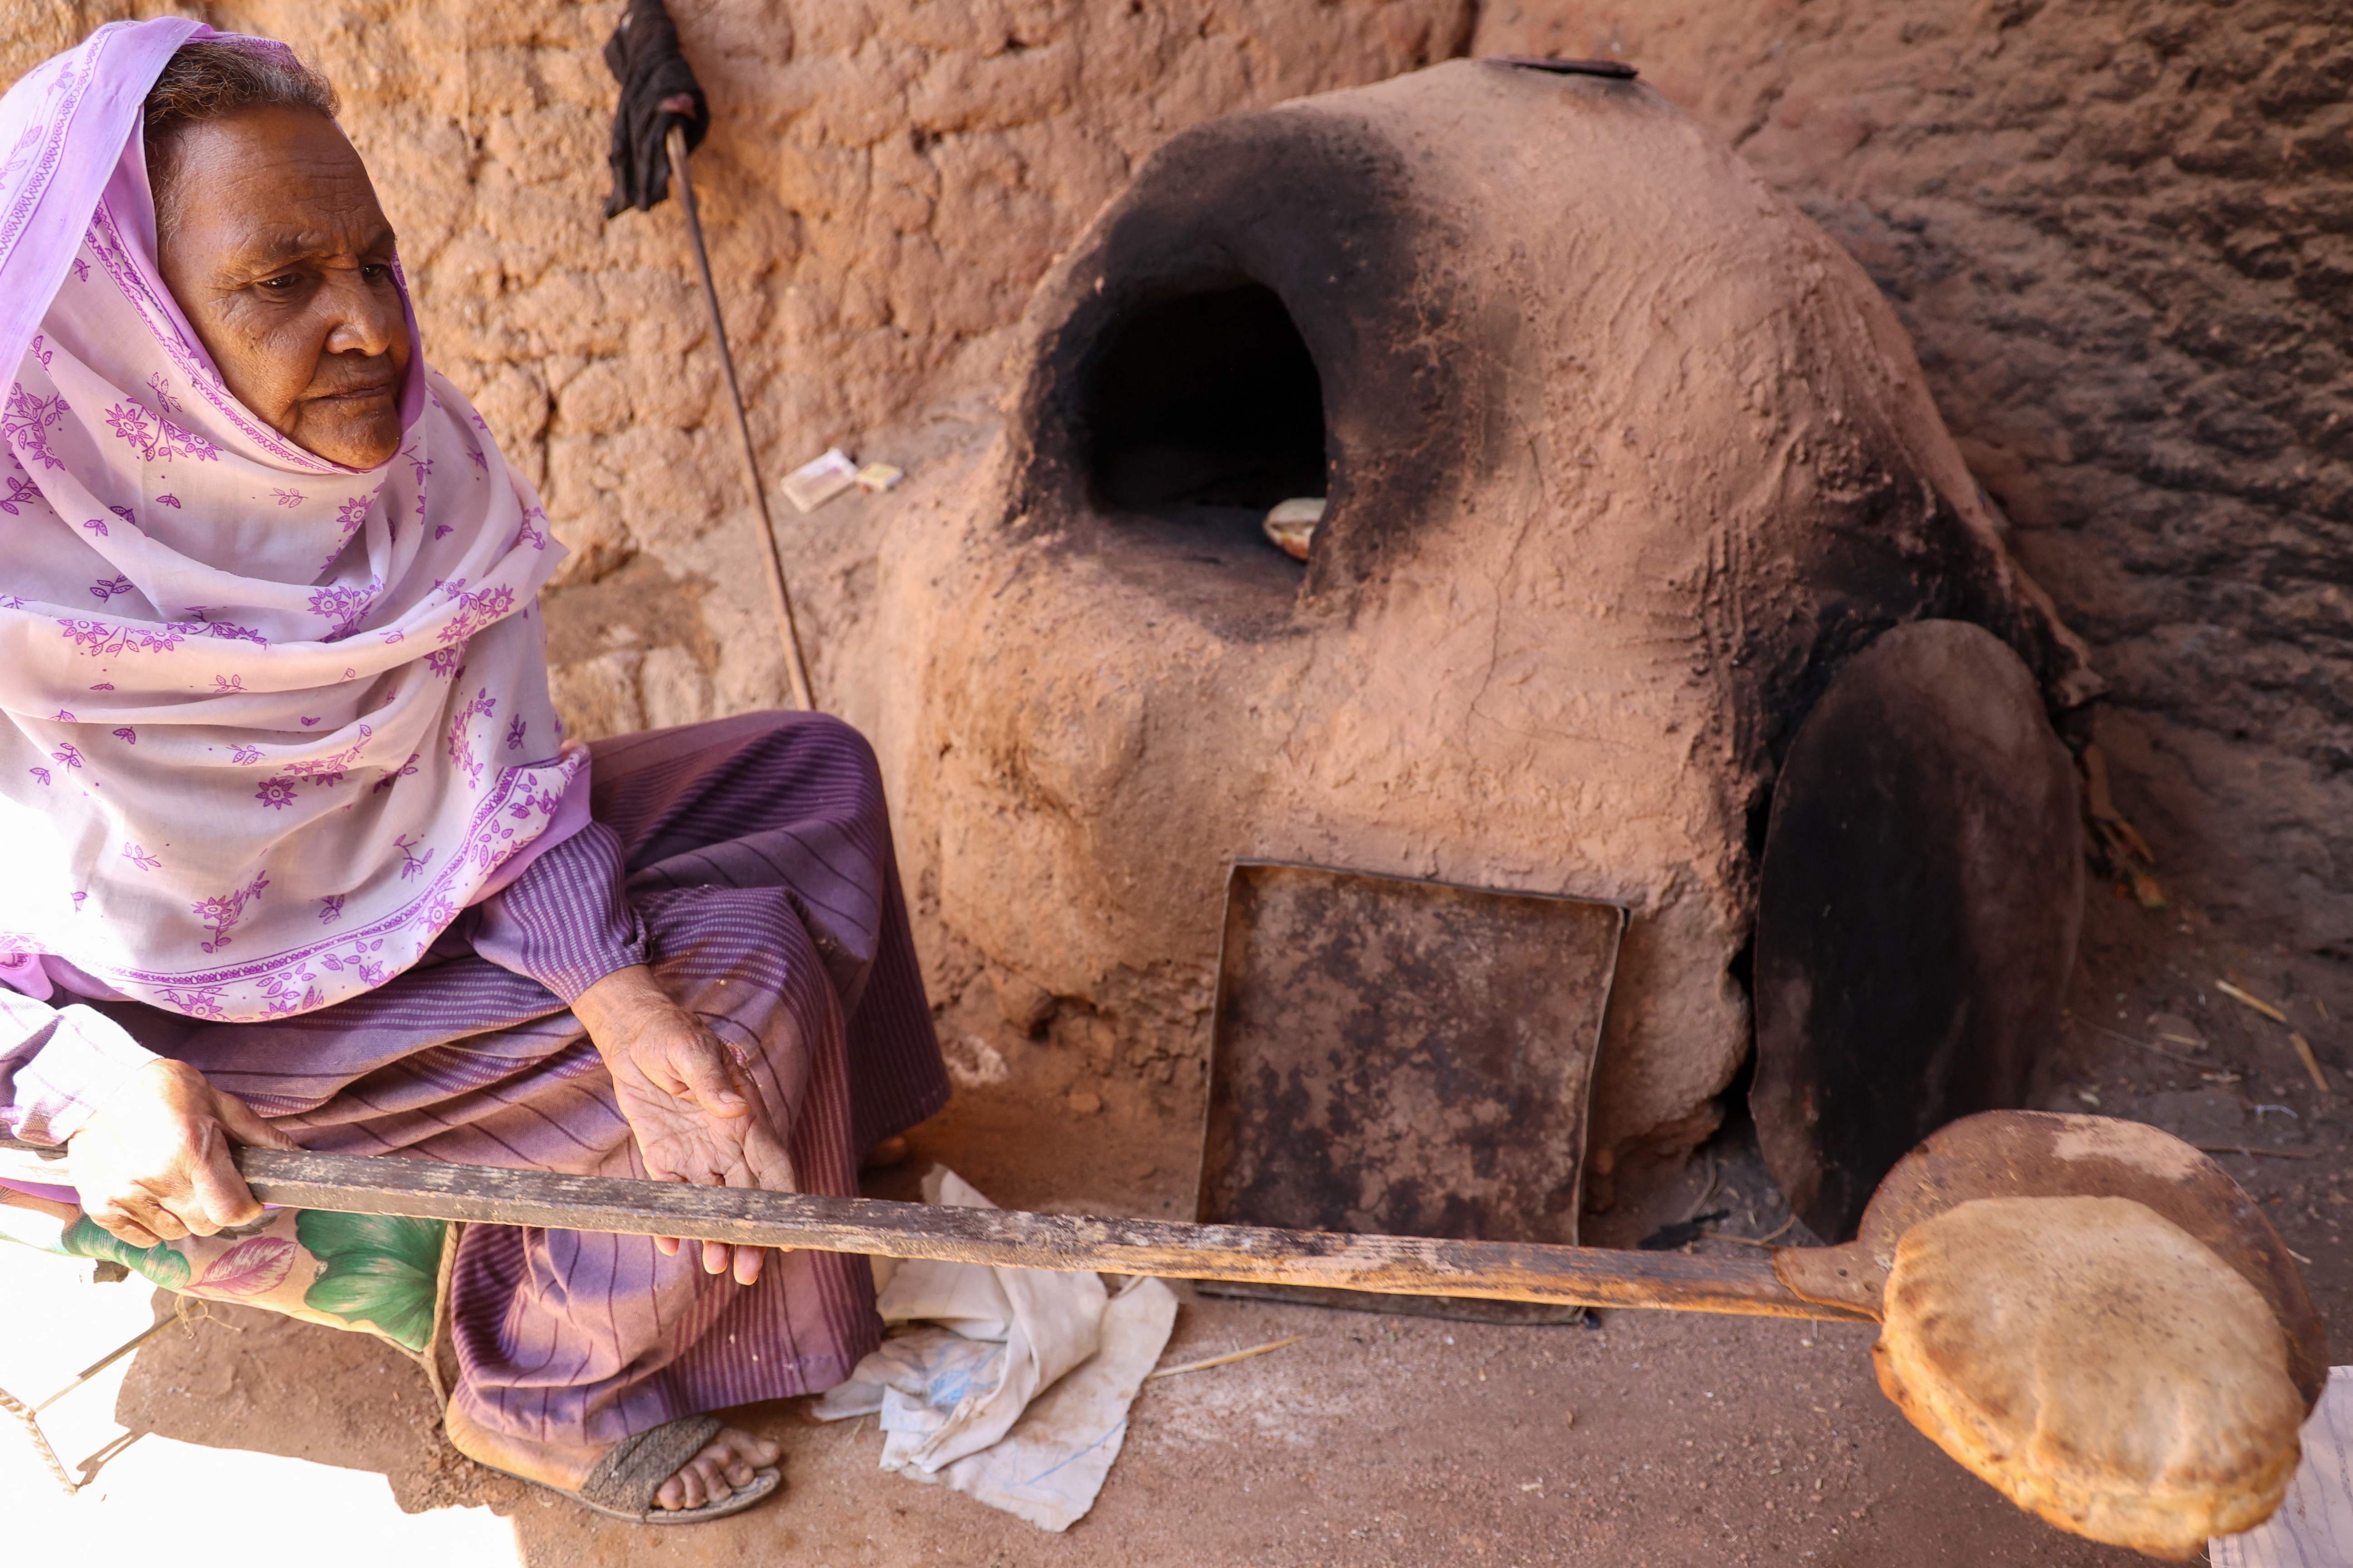 Local resident Naamat Jabal Sayyid Hasan, 75, bakes bread in a mud hut as she does daily to offer to people fleeing war-torn Sudan